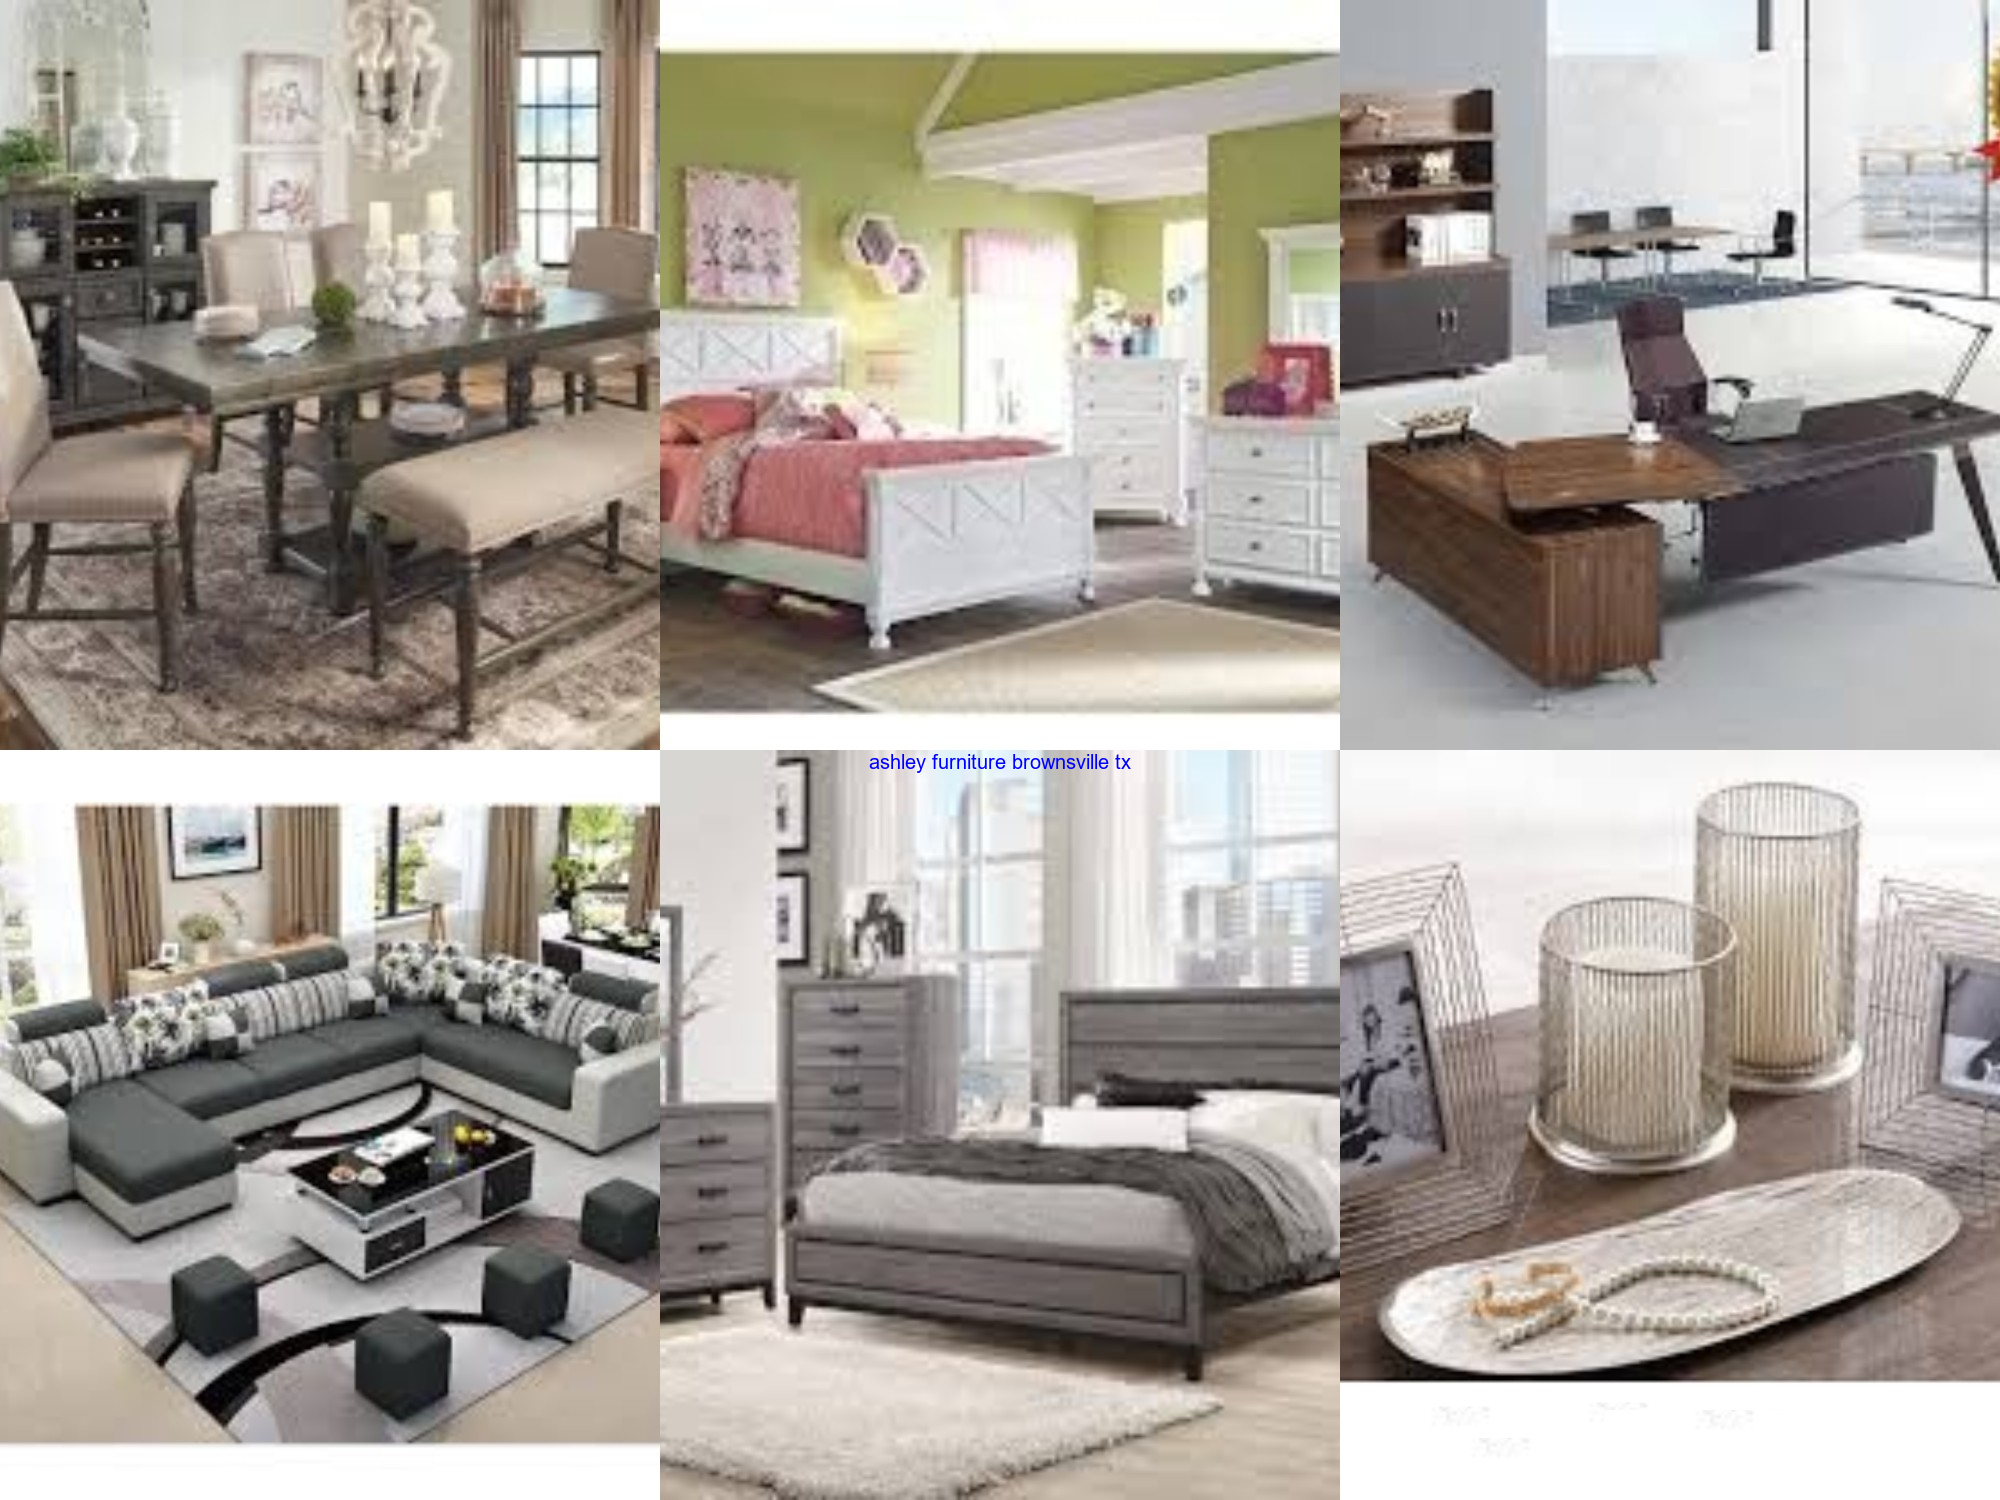 Ashley Furniture Brownsville Tx - I Might Suggest One To Try within Furniture Stores In Brownsville Tx